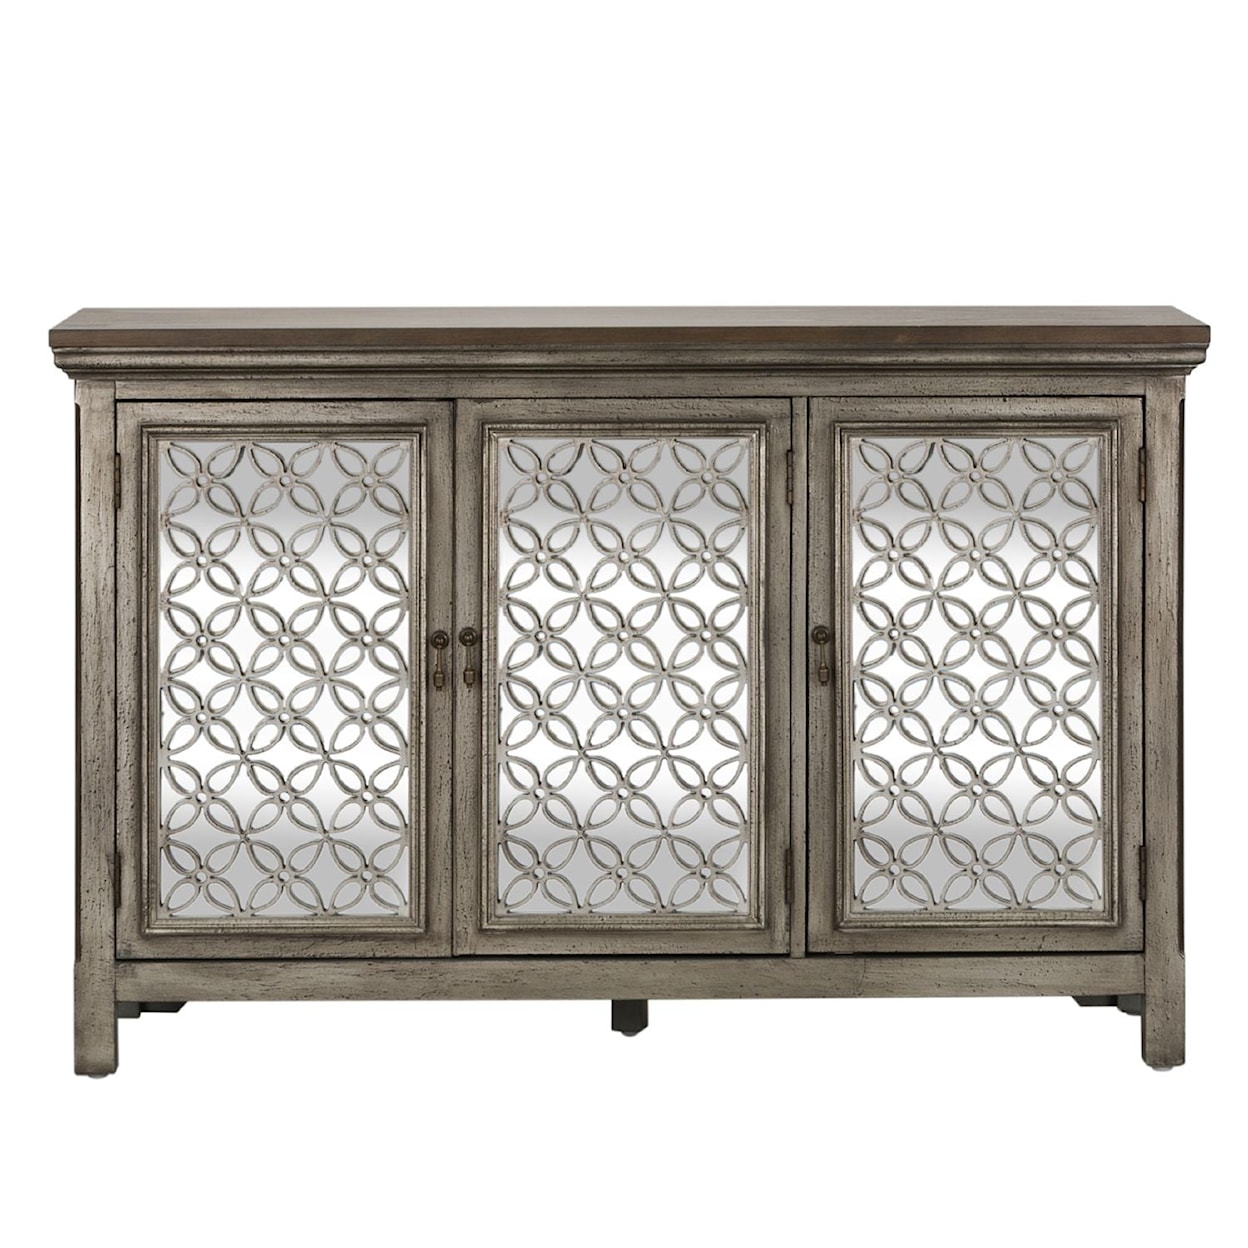 Libby Eclectic Living Accents 3-Door Accent Chest